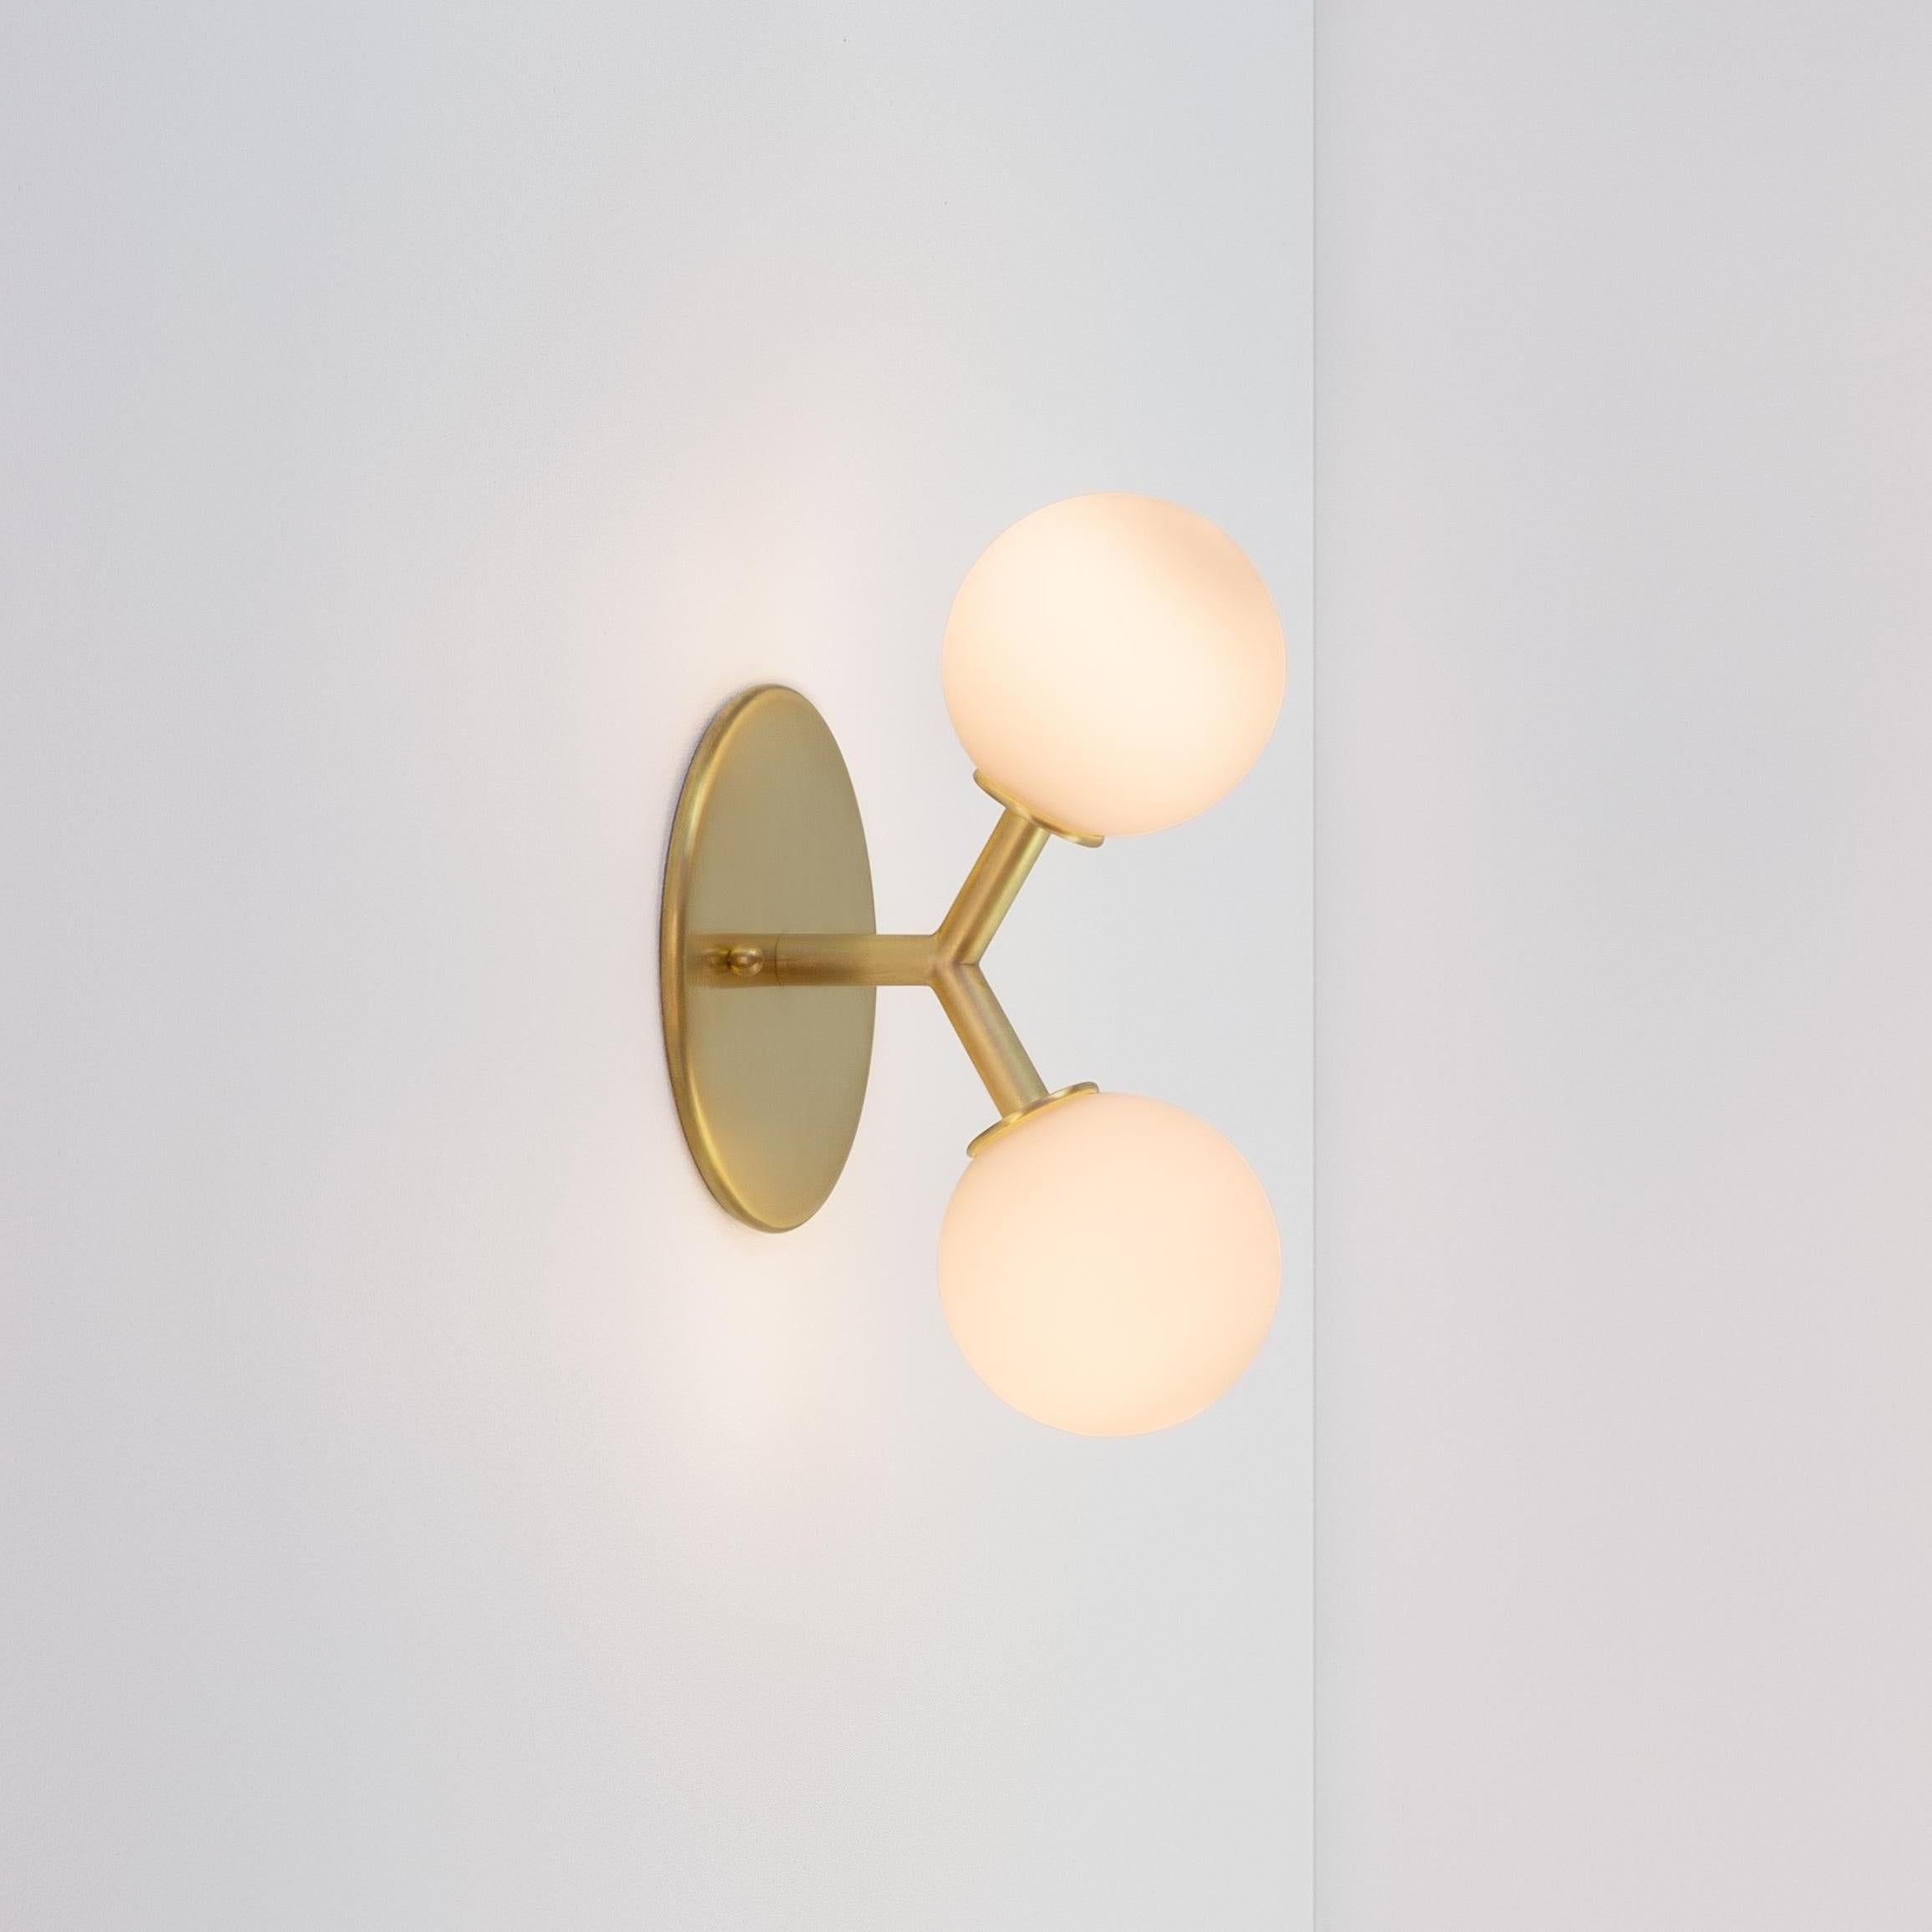 This listing is for 2x Y Sconce in Brass designed and manufactured by Research Lighting.

Materials: Brass & Glass
Finish: Raw Brushed Brass 
Electronics (per fixture): 2x G9 Sockets, 2x 2.5 Watt LED Bulbs (included), 500 Lumens total
UL Listed.